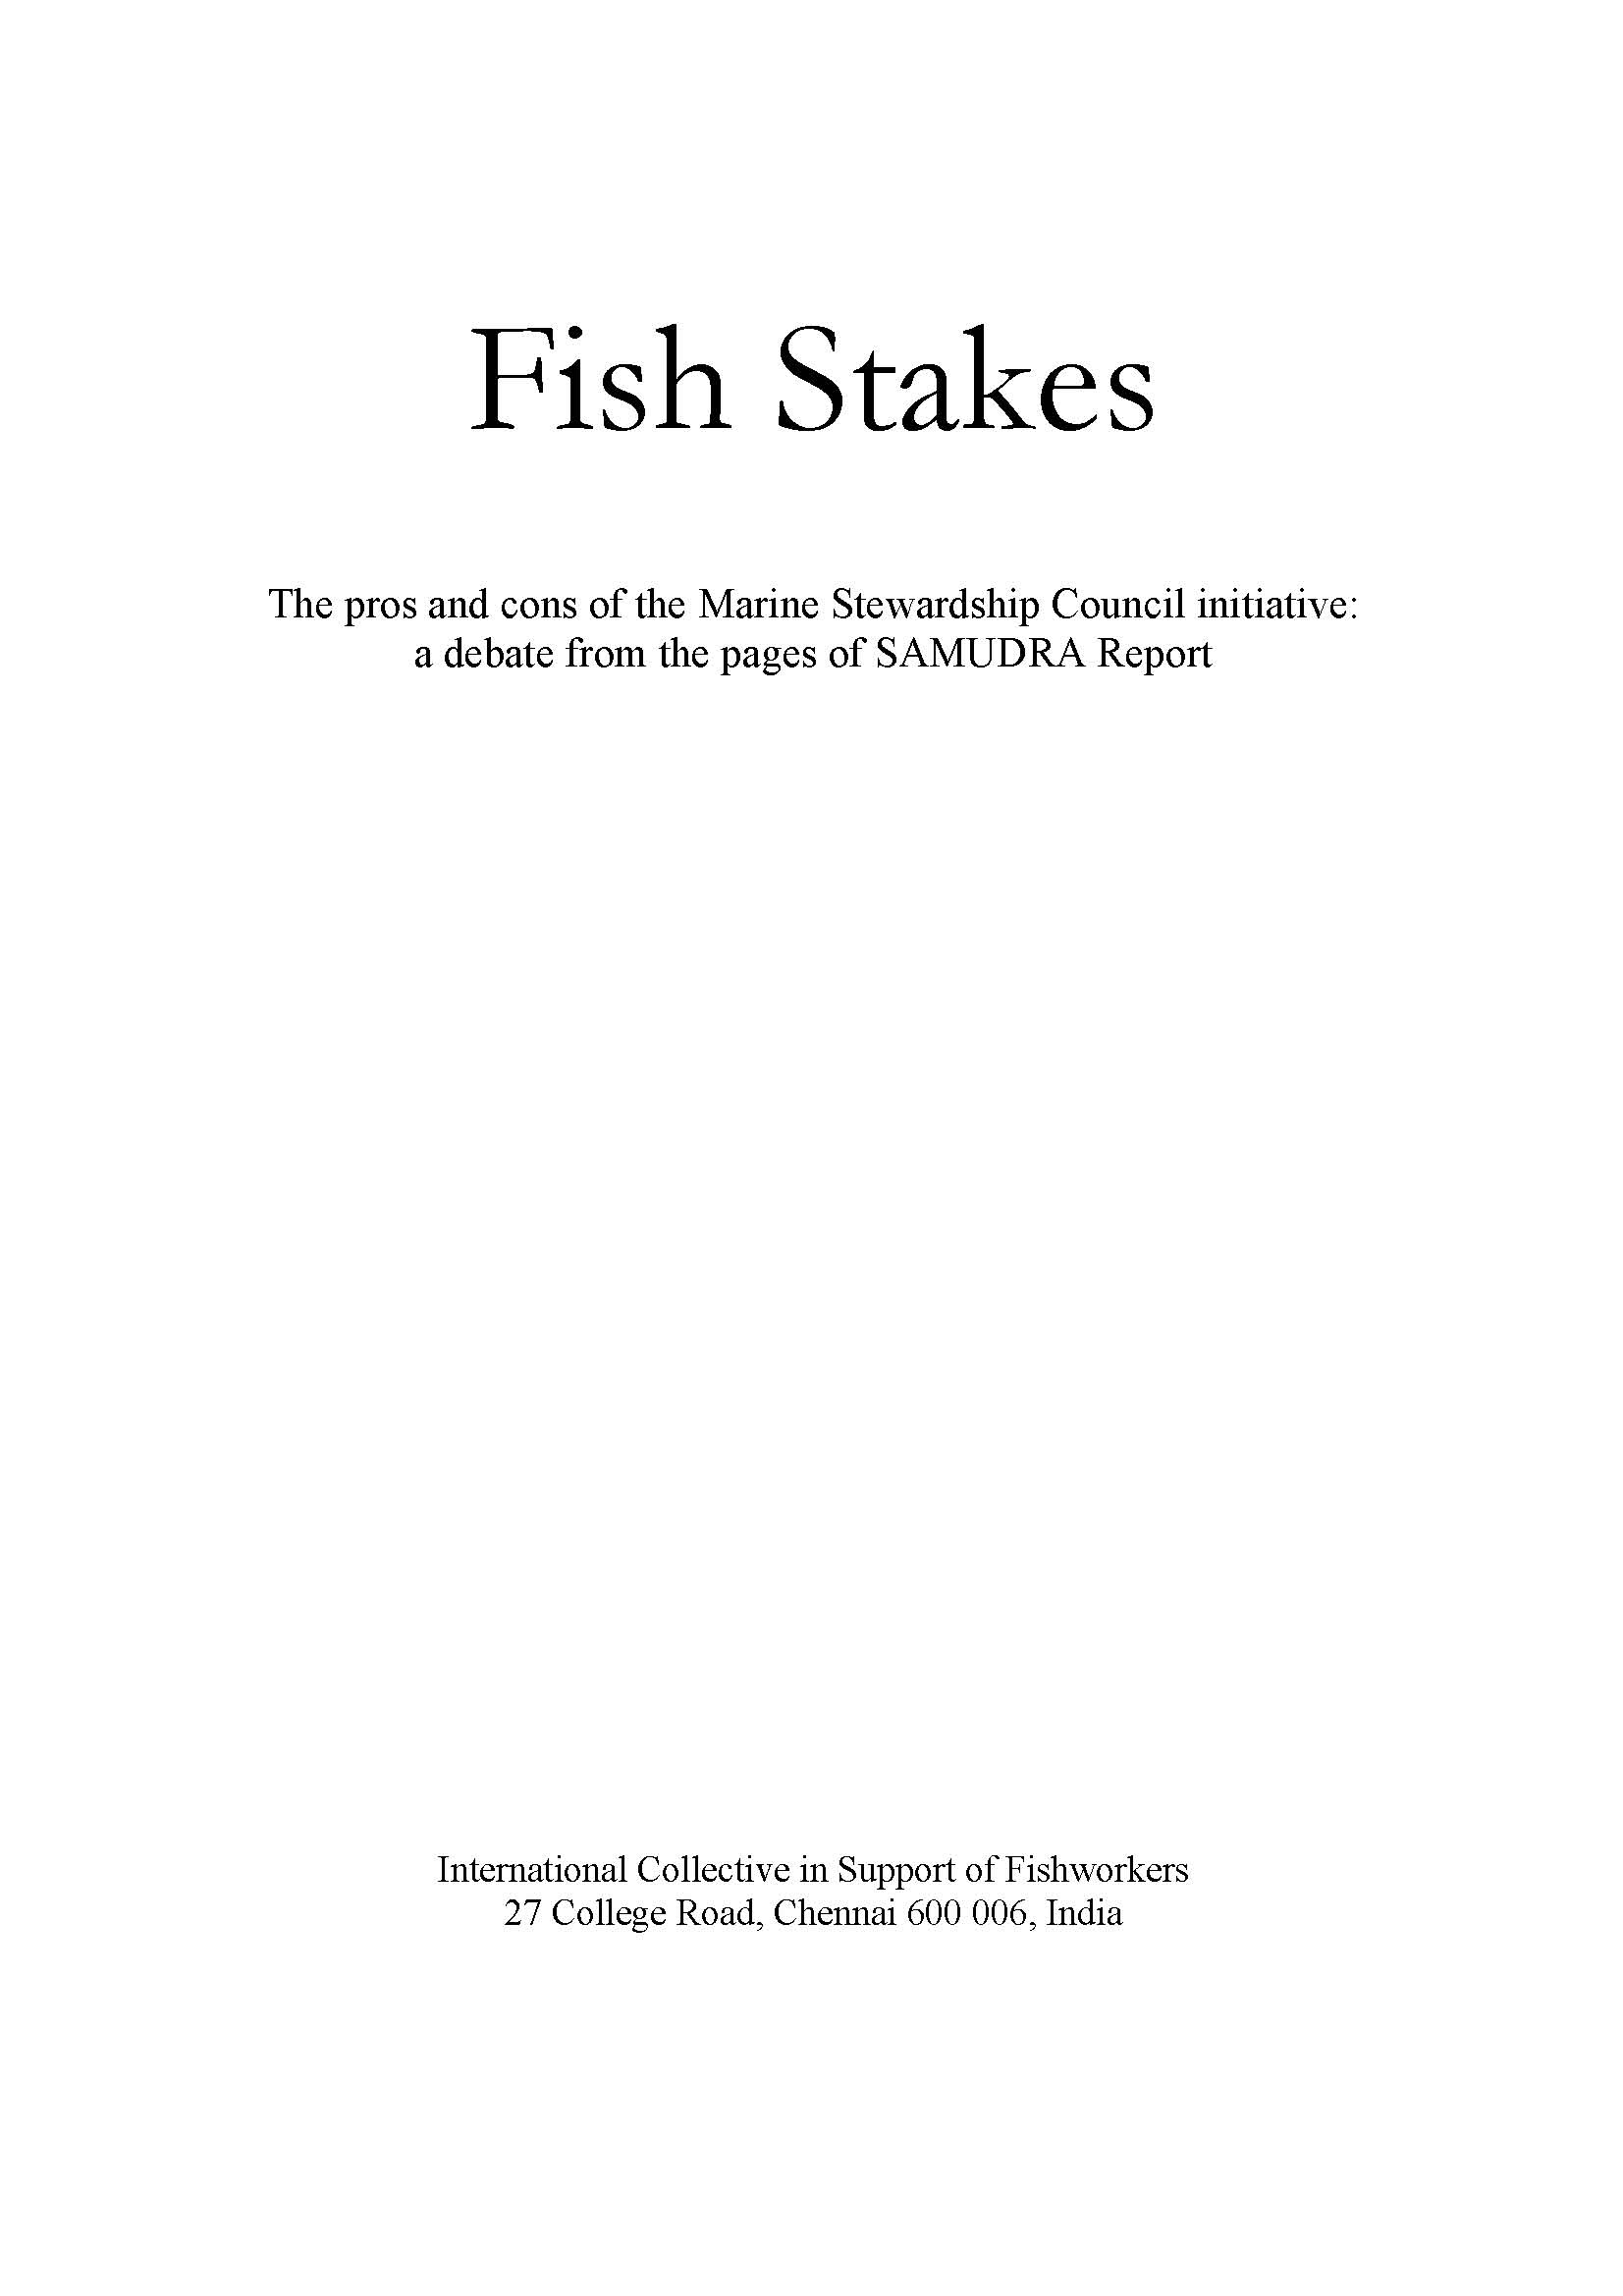 Fish Stakes – The Pros and Cons of the Marine Stewardship Council Initiative: A Debate from the Pages of SAMUDRA Report